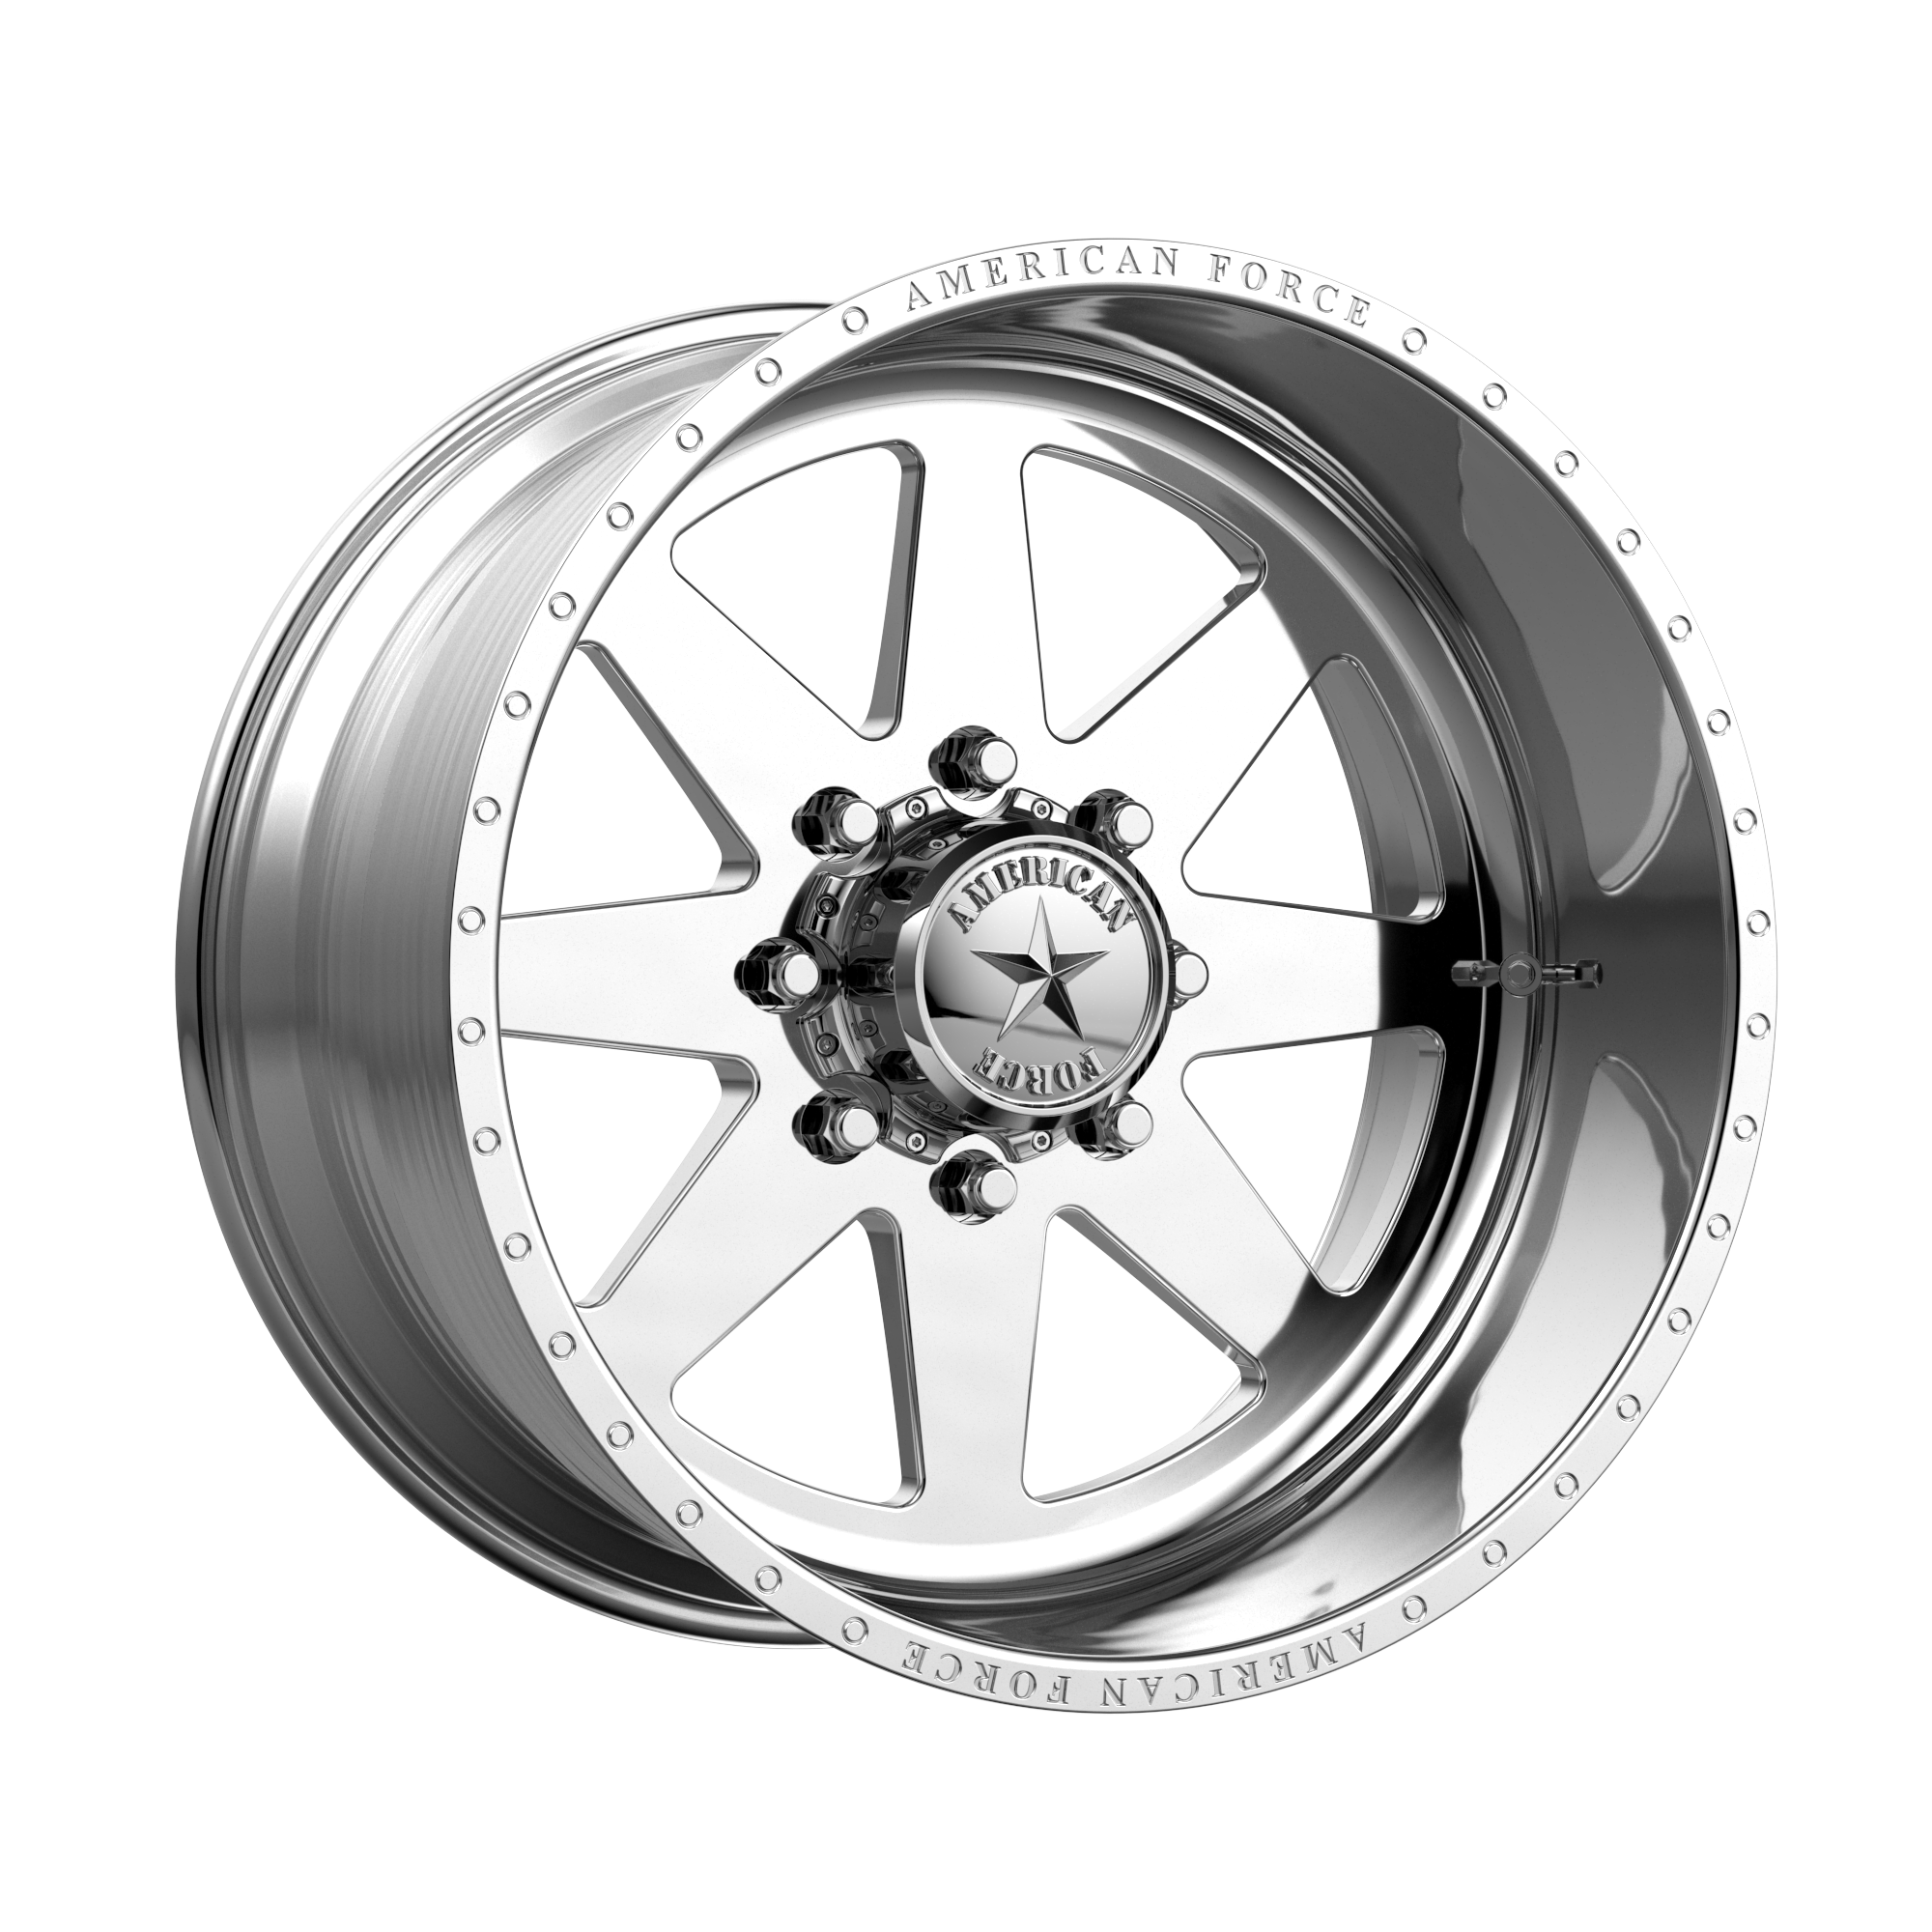 INDEPENDENCE SS 20x14 6x139.70 POLISHED (-73 mm) - Tires and Engine Performance